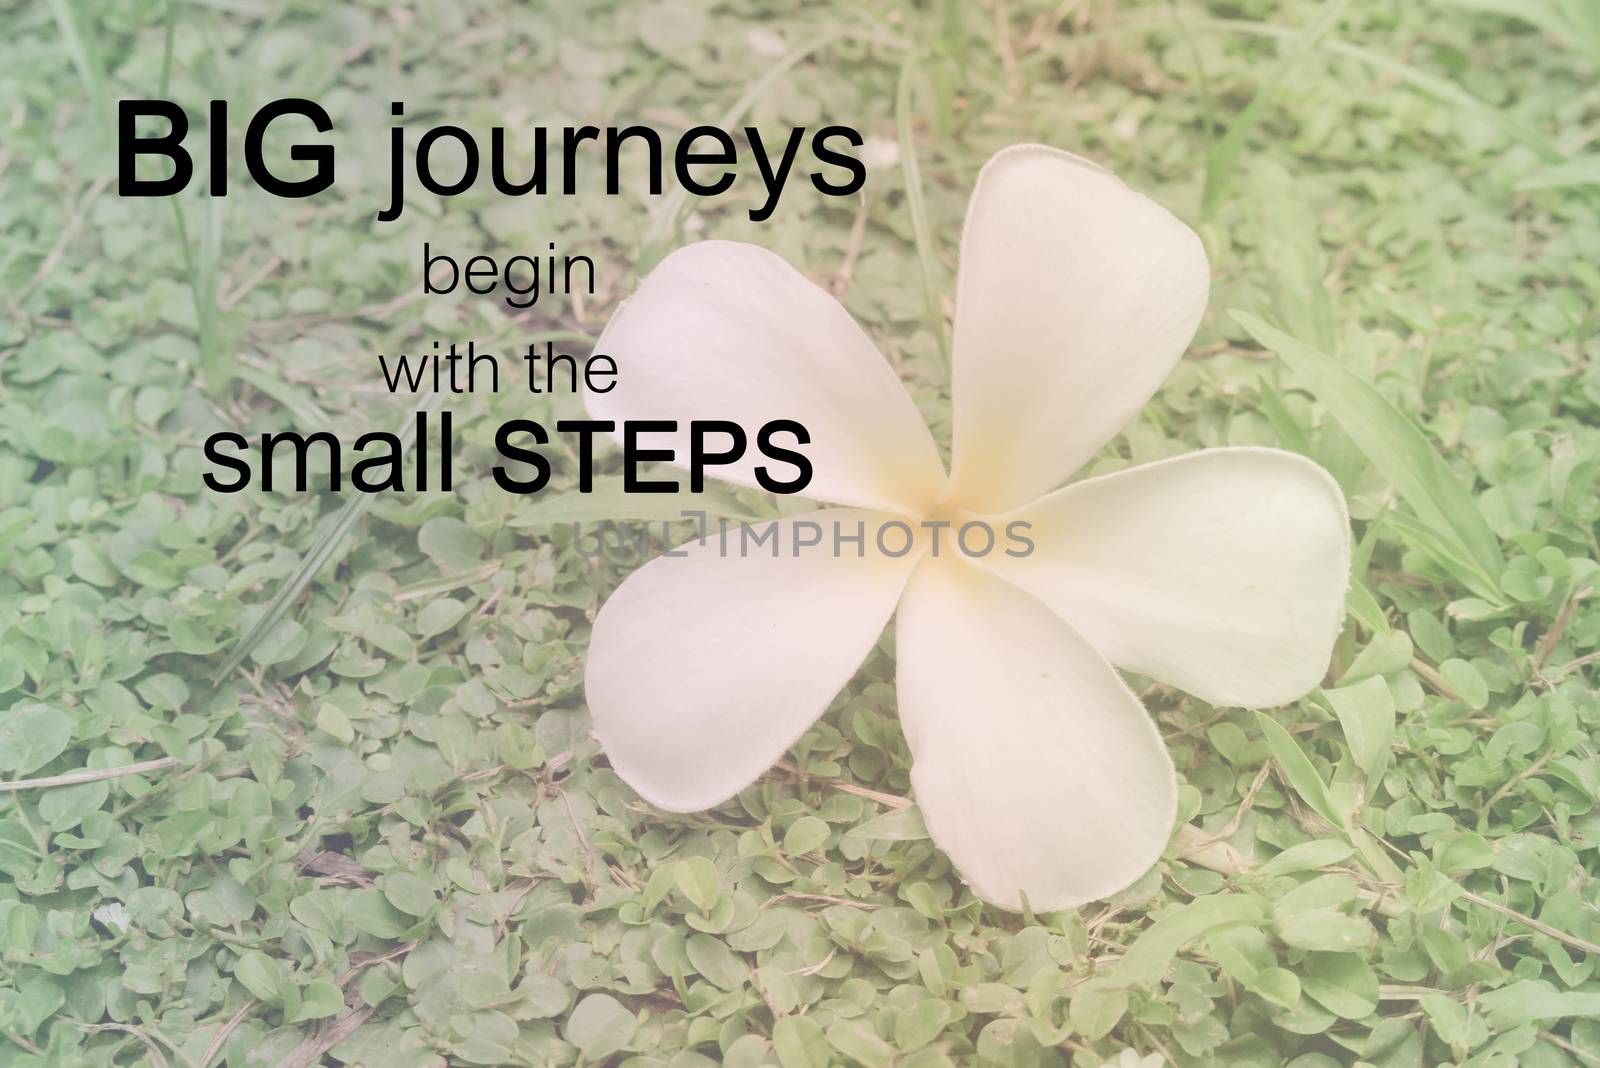 Word  Big journeys begin with the small steps.Inspirational motivational quote on white plumeria on the ground - Vintage Filter Effect